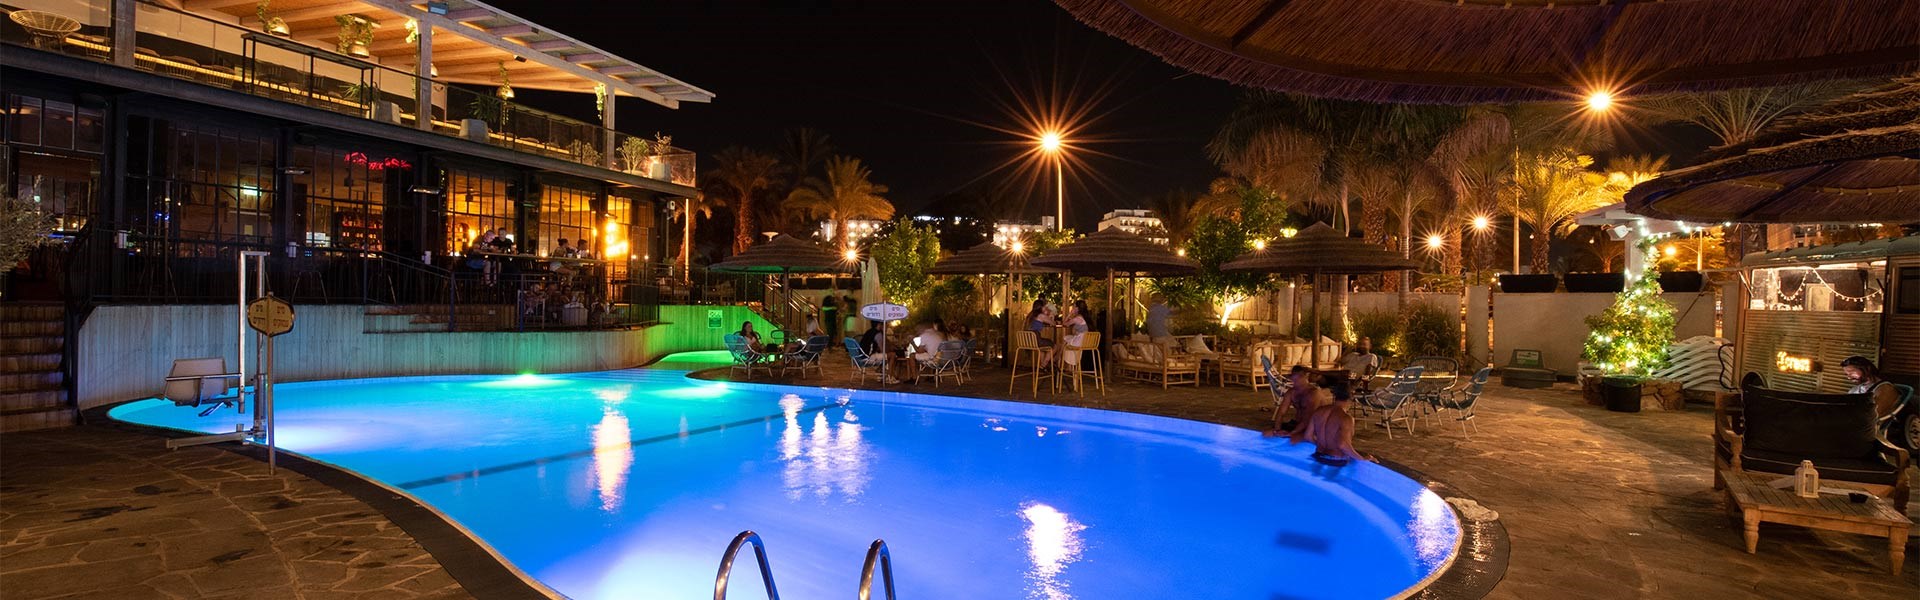 PLAY Eilat Hotel - Contact Us